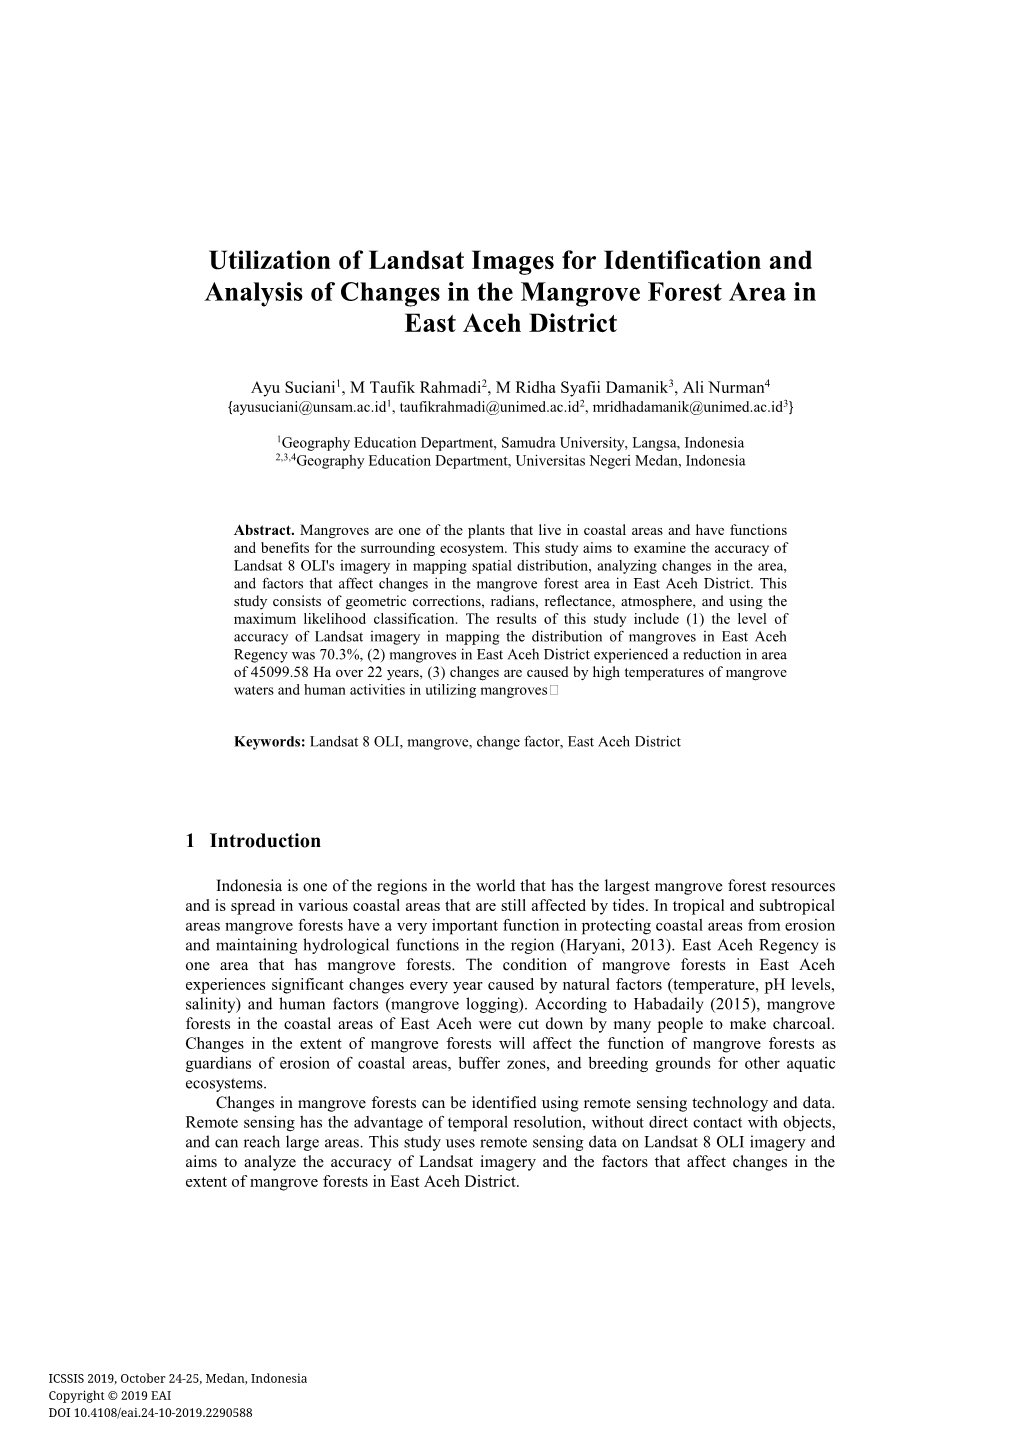 Utilization of Landsat Images for Identification and Analysis of Changes in the Mangrove Forest Area in East Aceh District